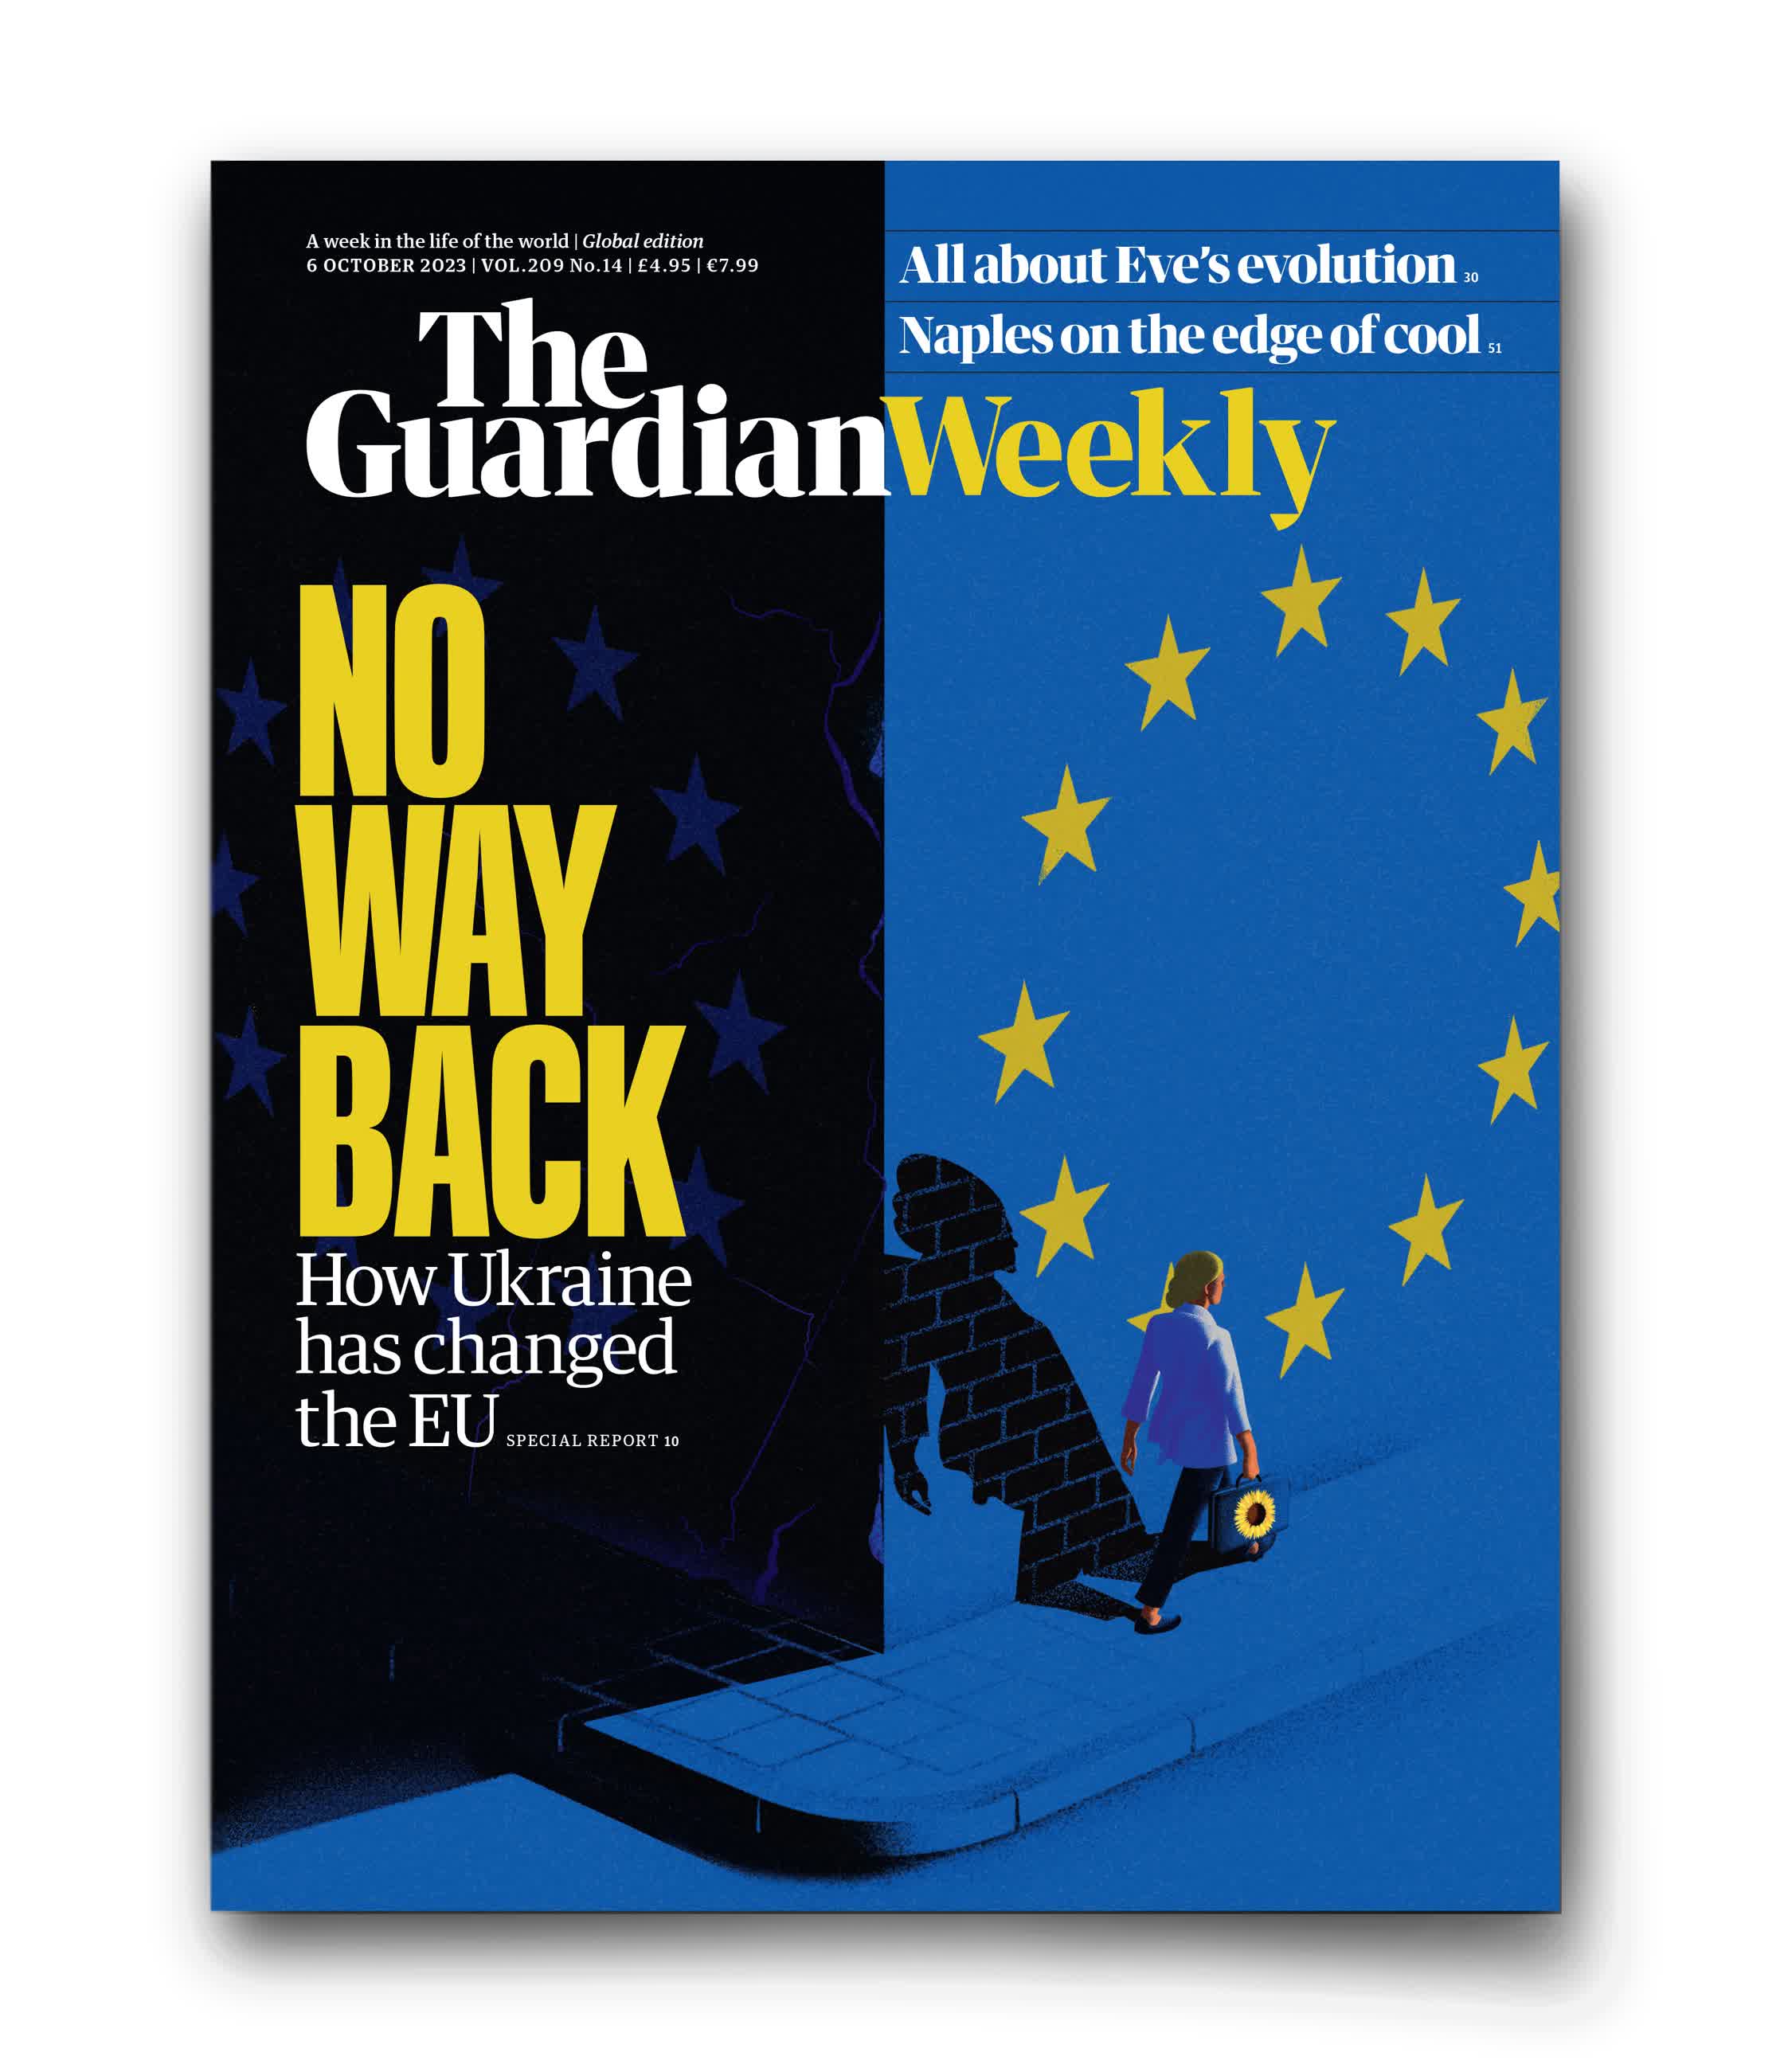 The Guardian Weekly_Cover concept and illustration_6th October 2023_VOL.209 No.14.jpg